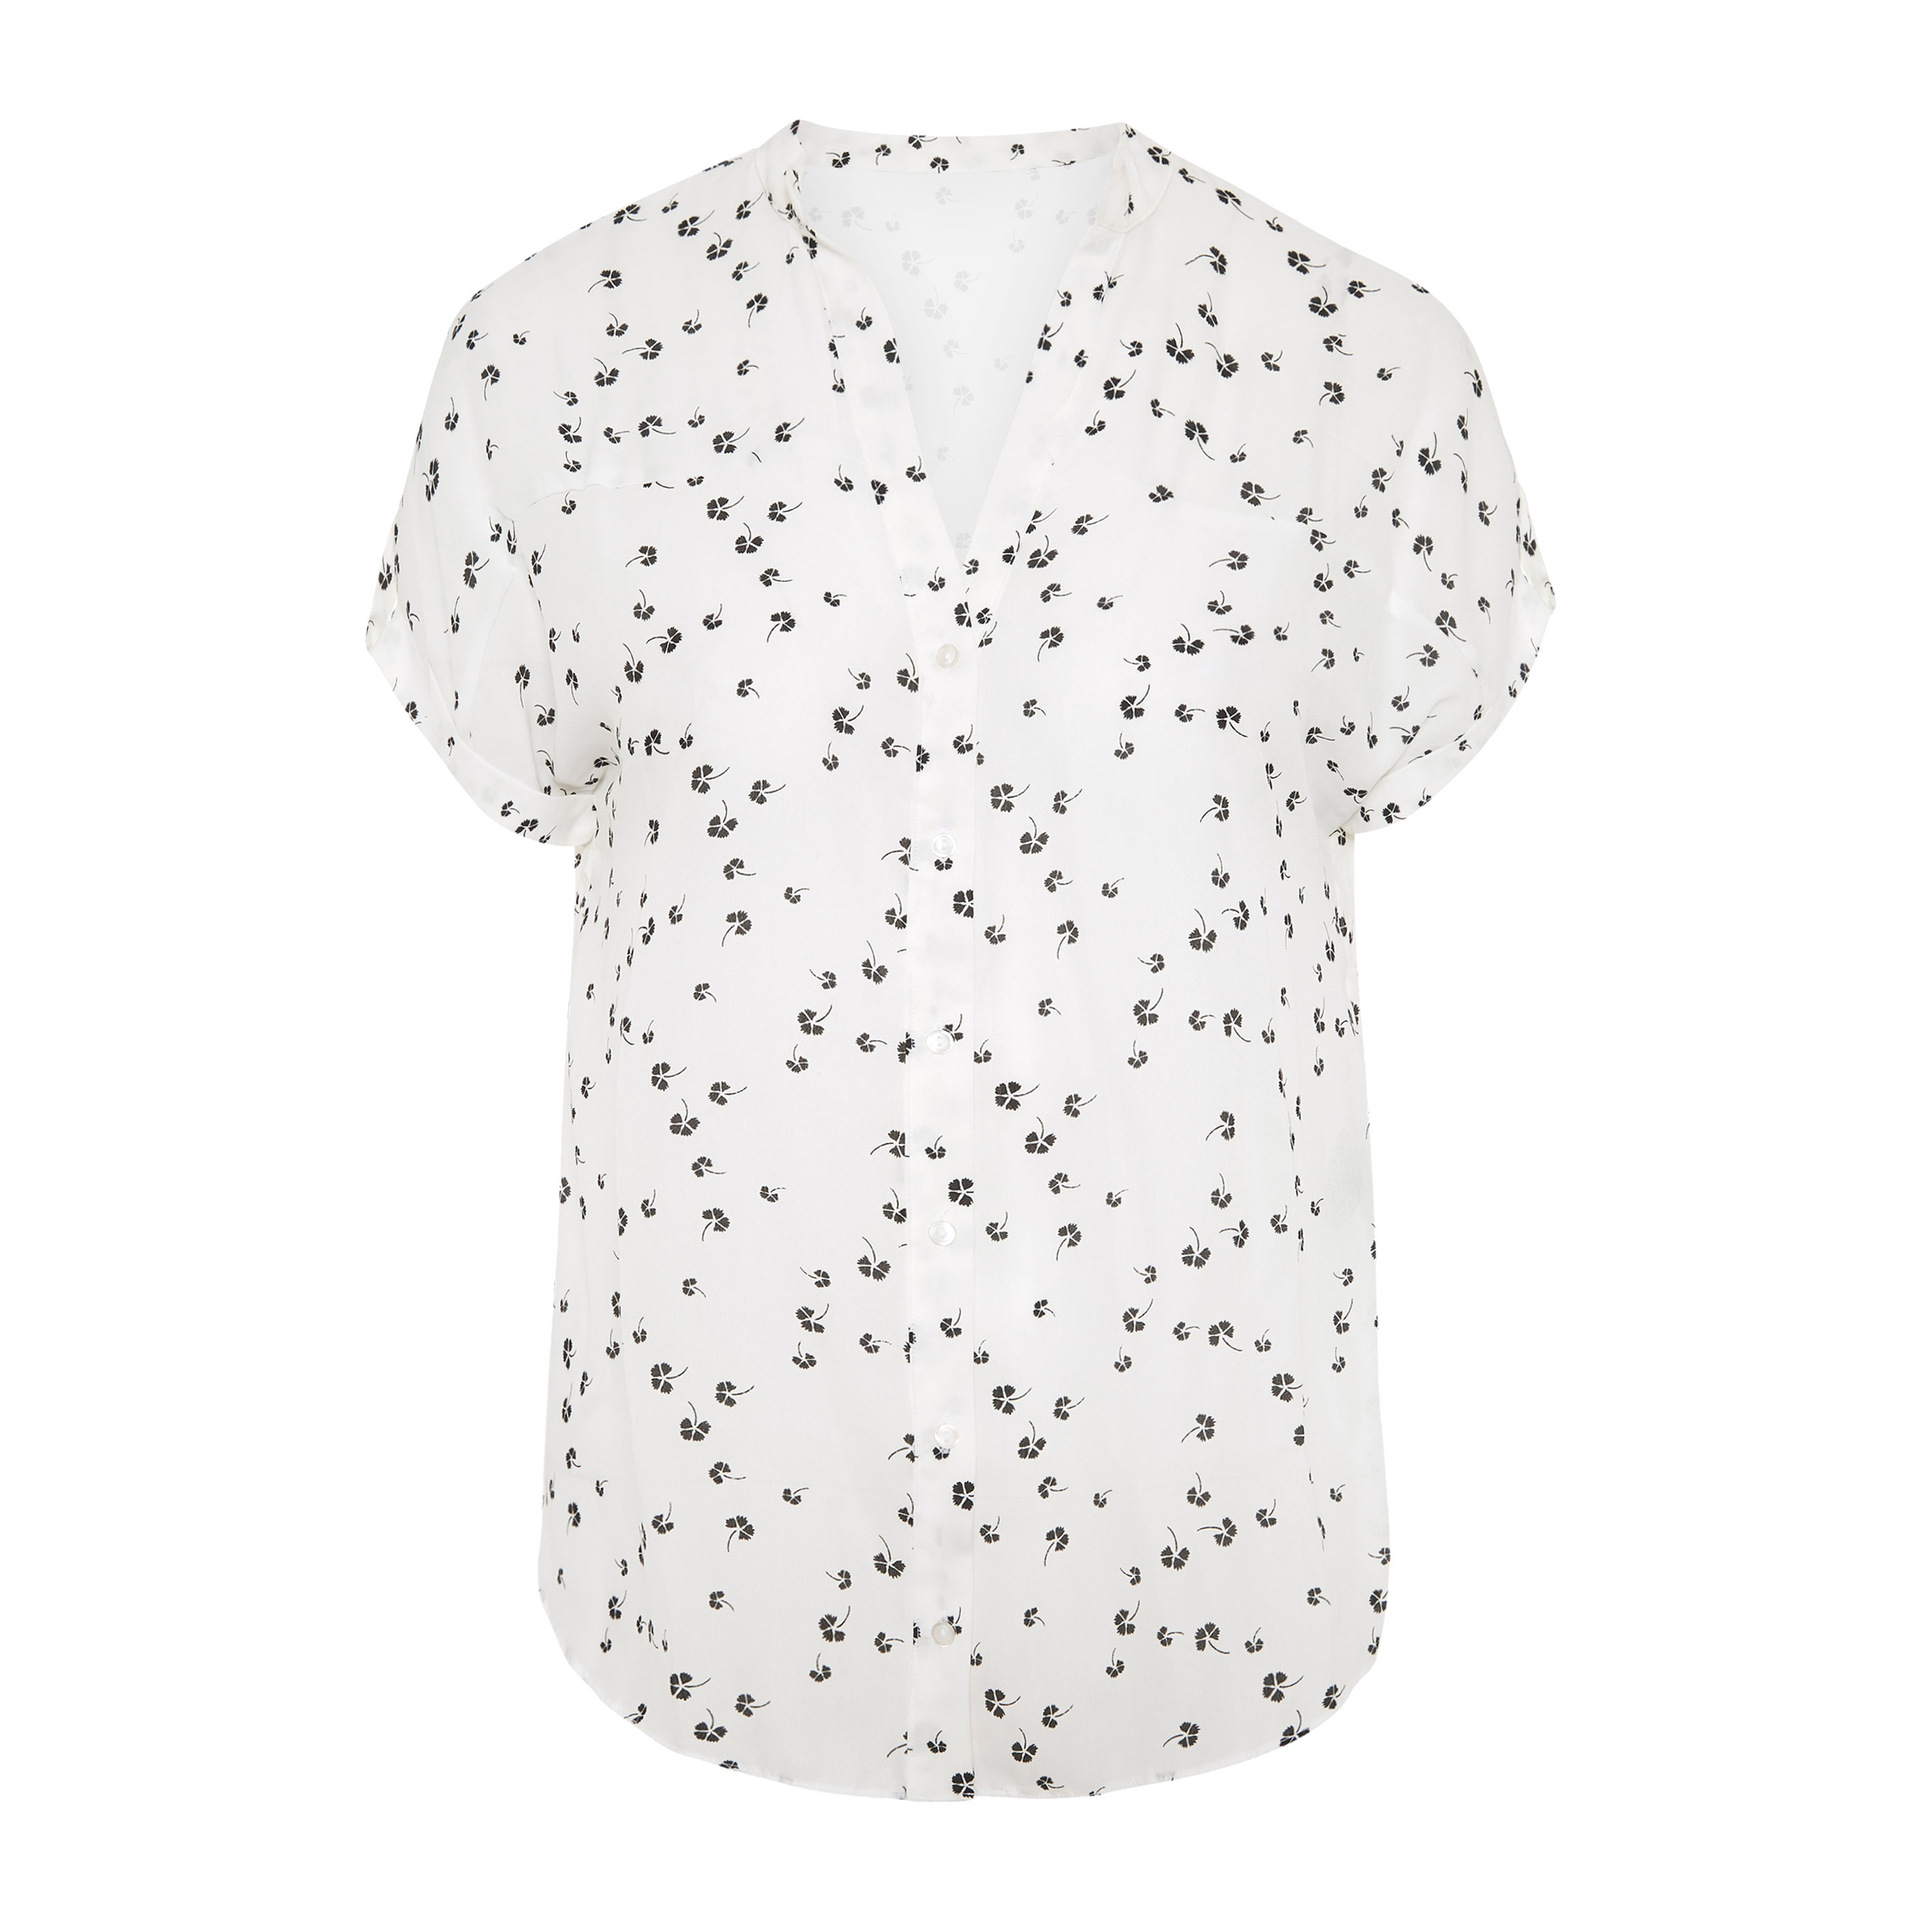 Factory Supply Summer Leopard Polka Dots Big Size Casual Blouse Pus Size Women's Blouses